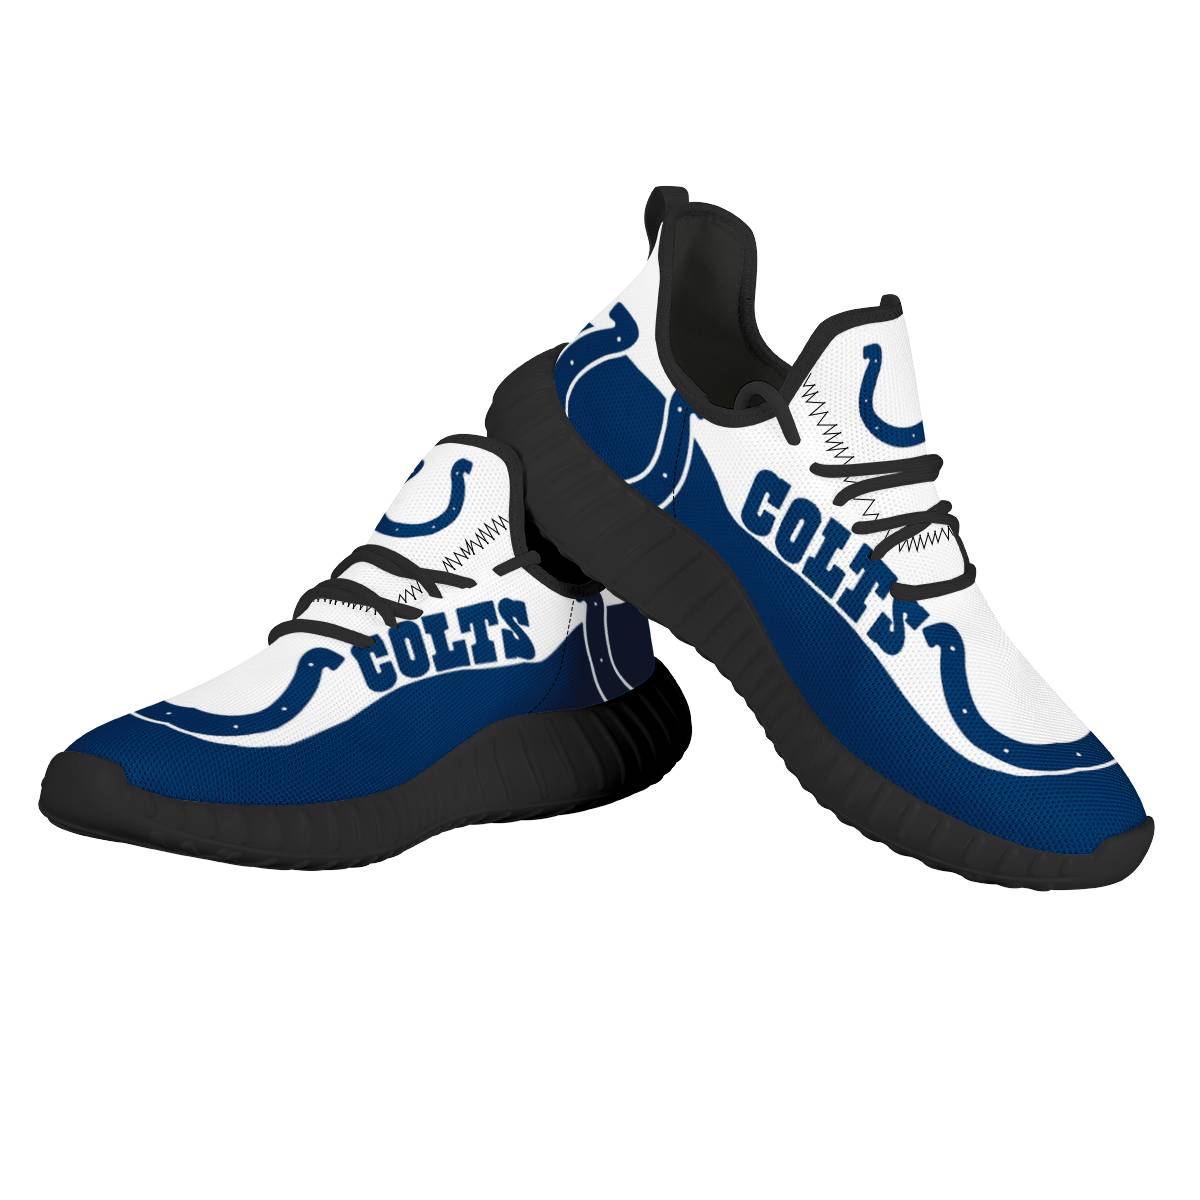 Men's Indianapolis Colts Mesh Knit Sneakers/Shoes 008